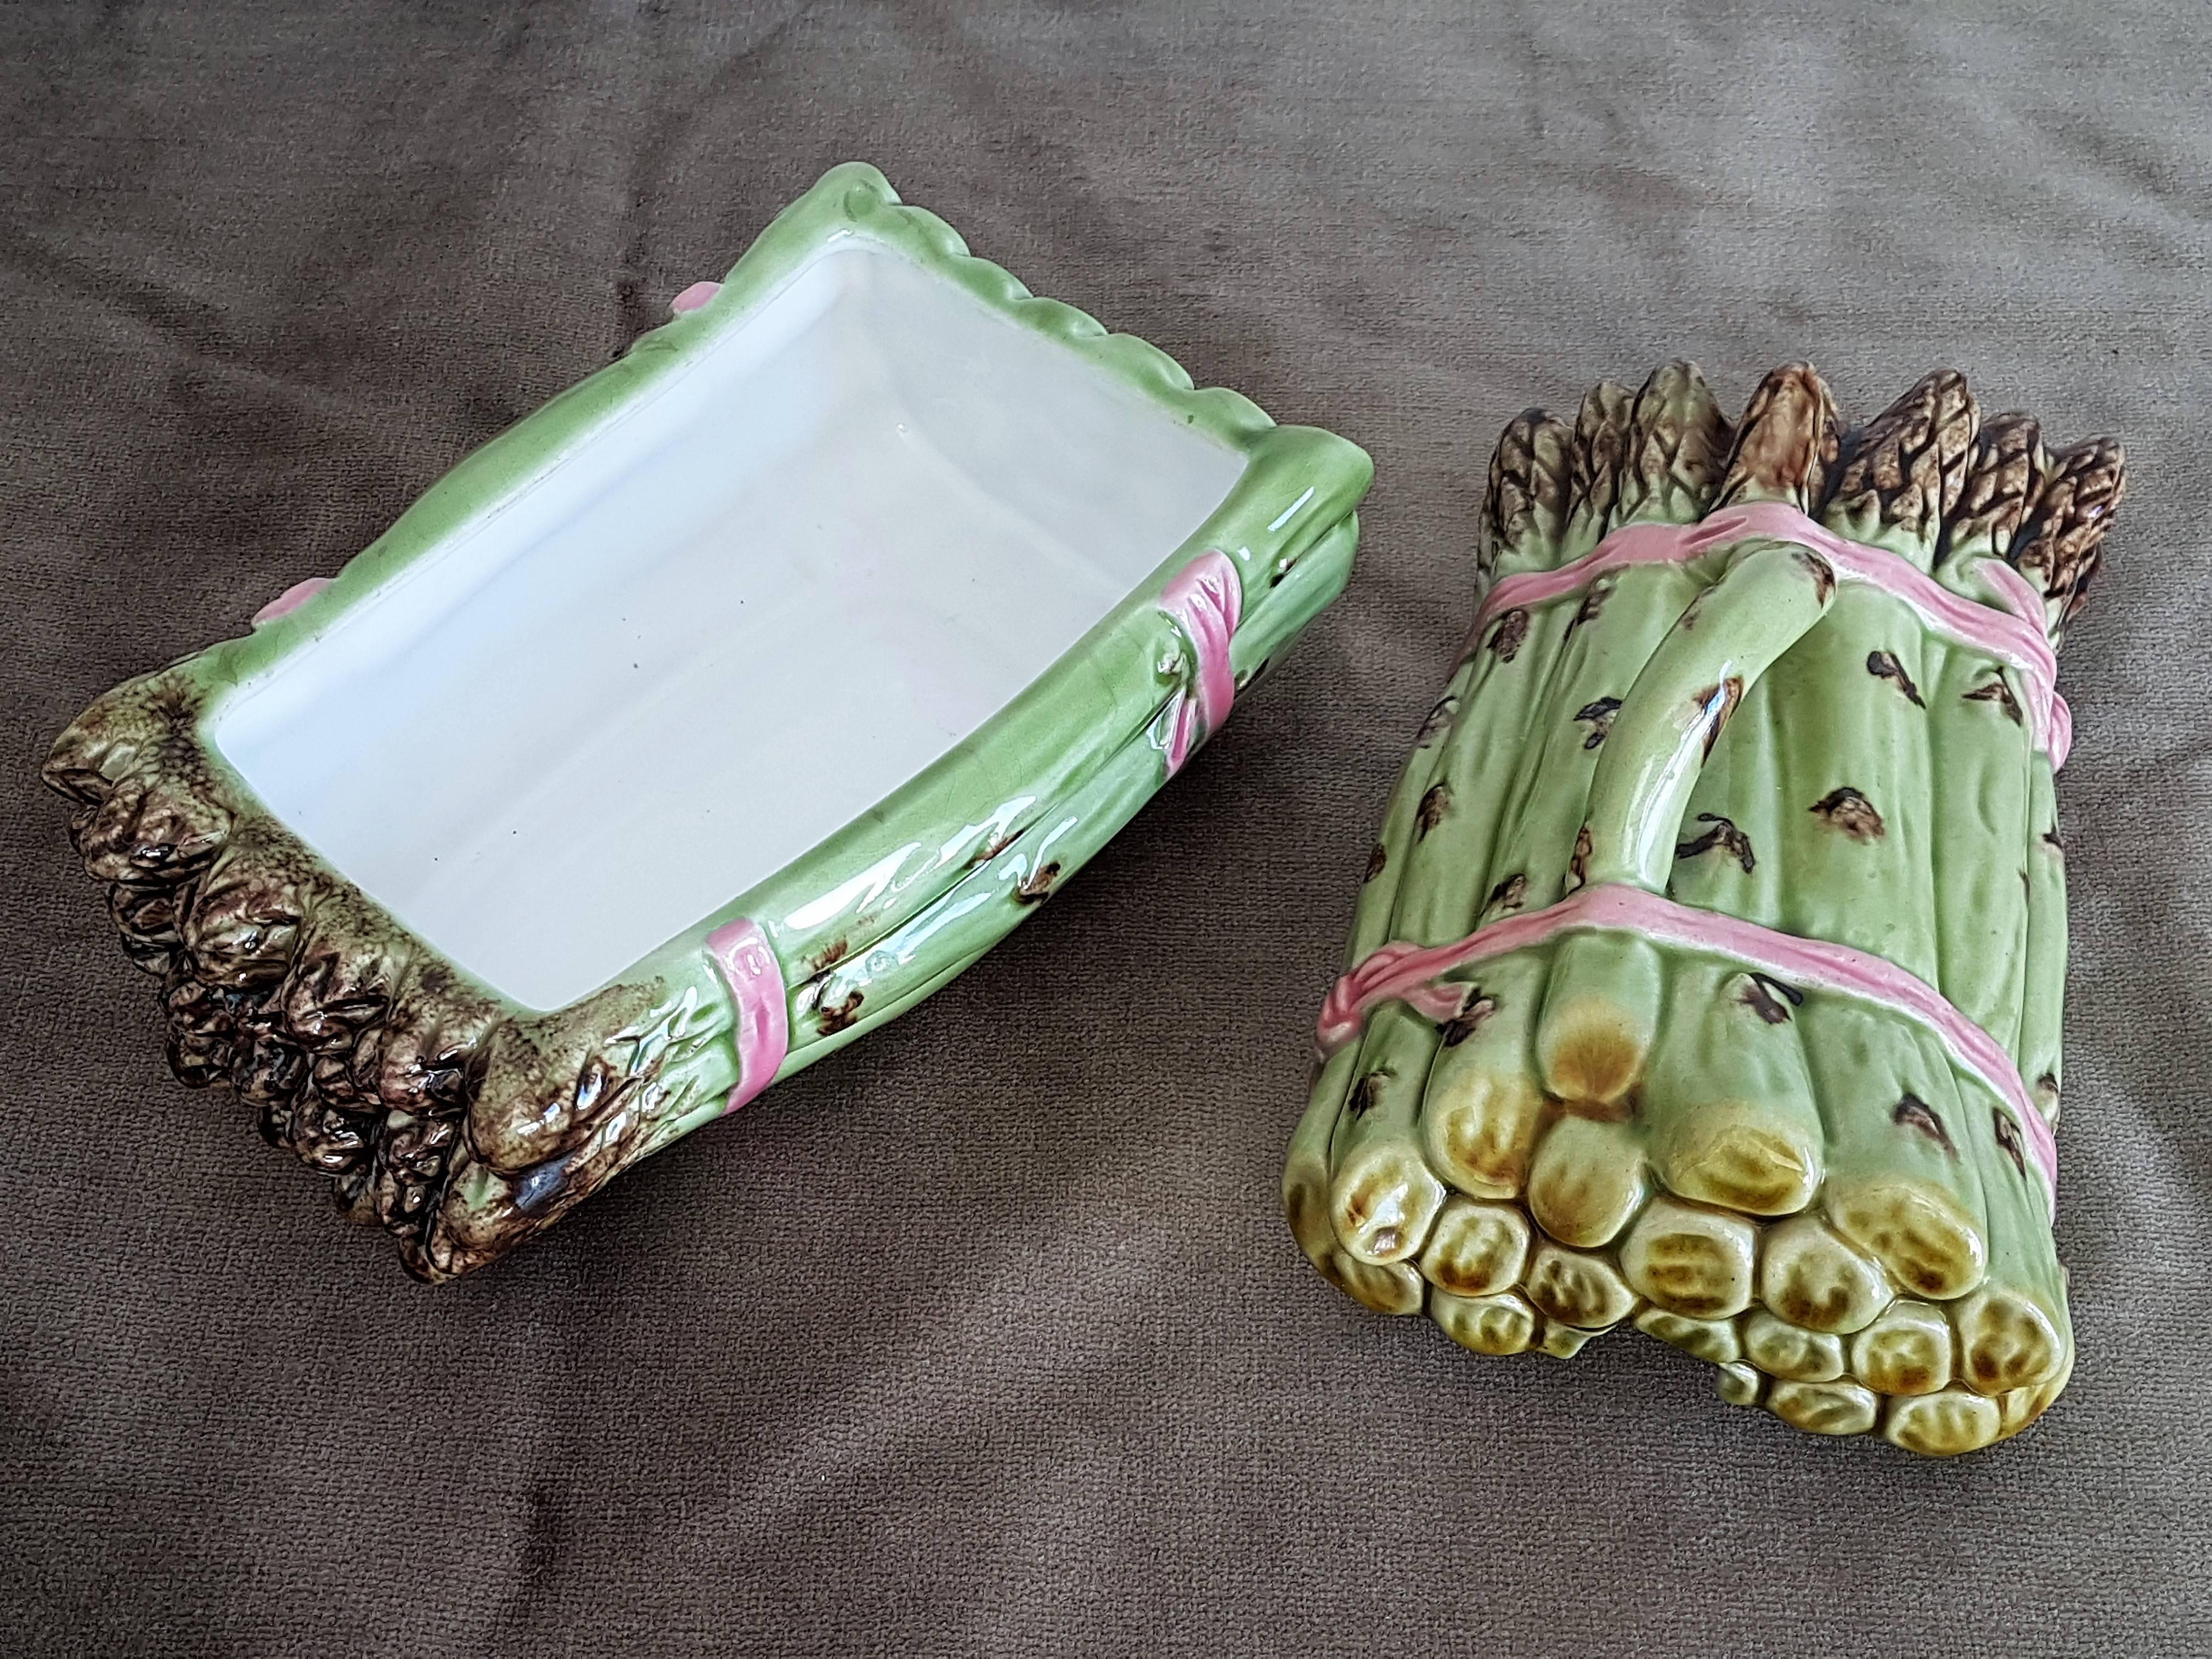 Green asparagus serving platter and cober top beautifully decorated by a pink rose ribbon in Barbotine ceramic in a excellent condition.
France.